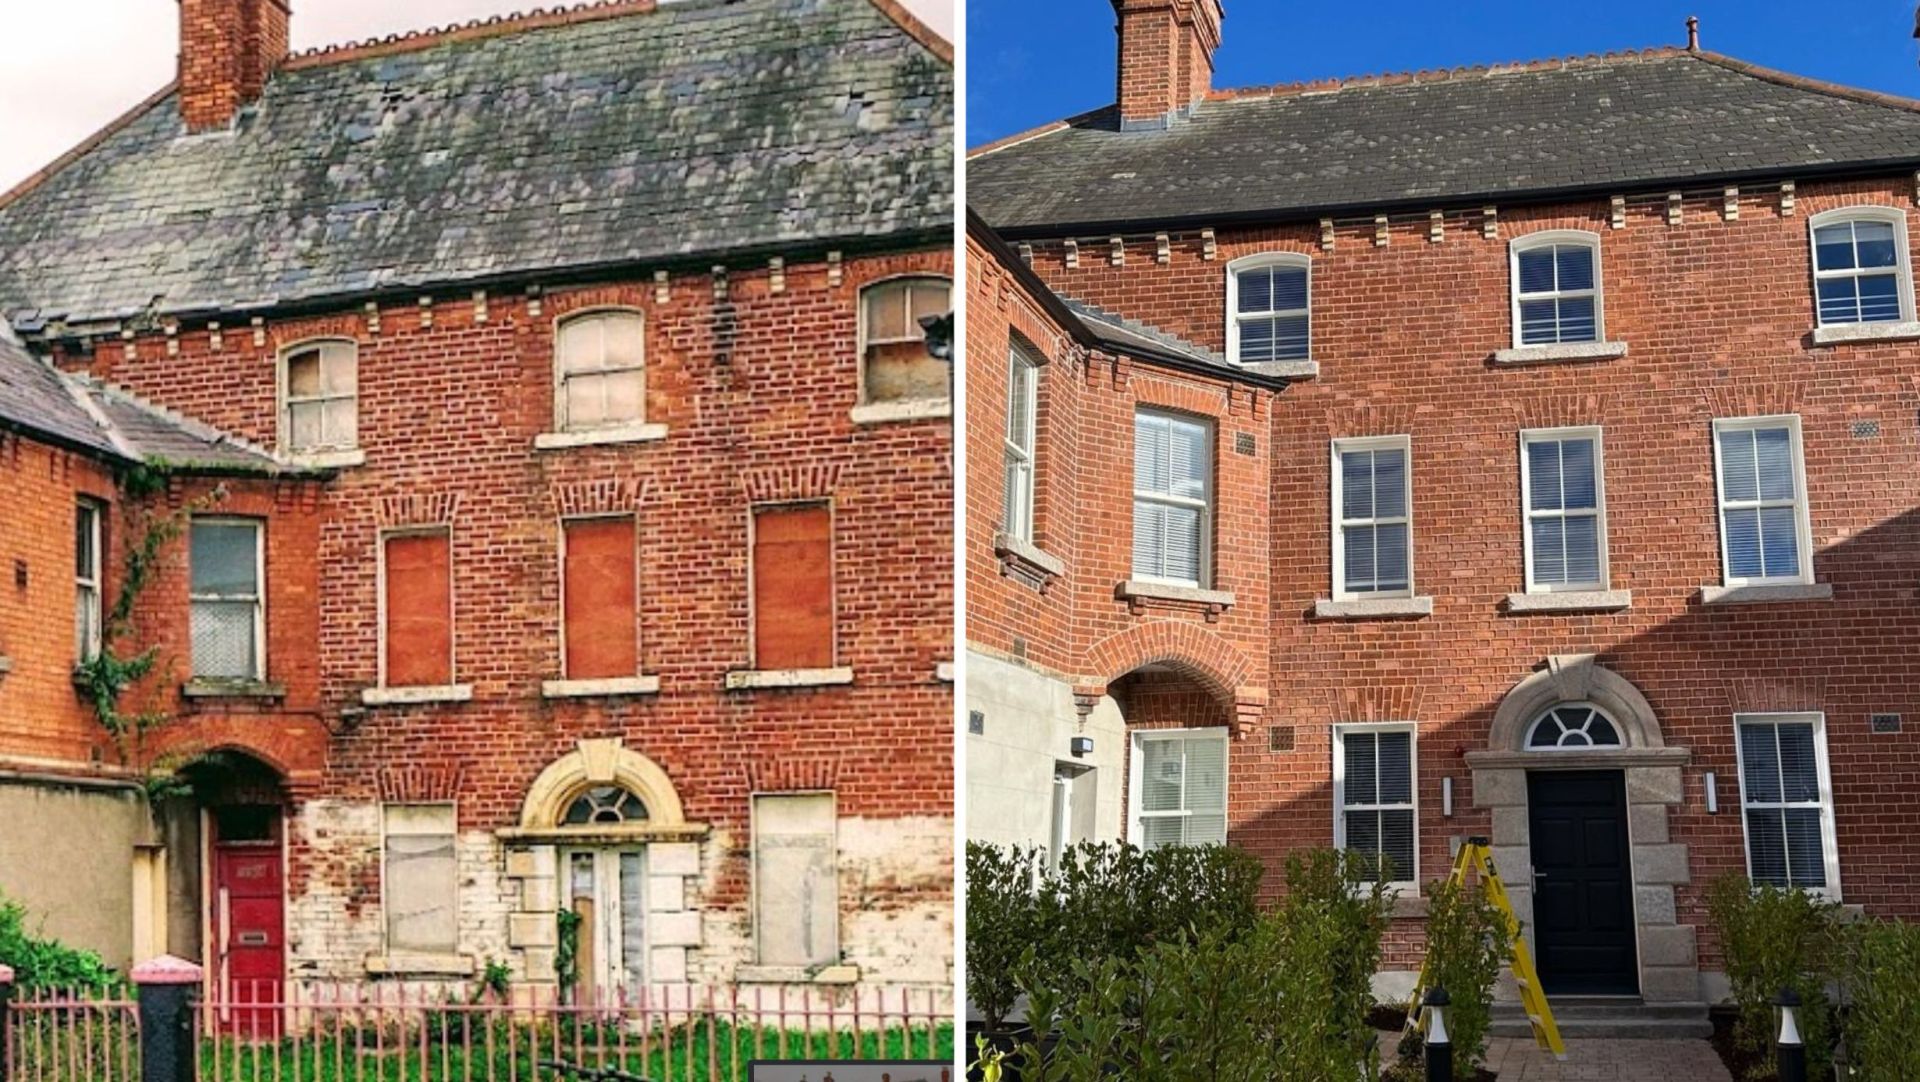 Before and After photos of a restored Georgian house in Harold's Cross, Dublin